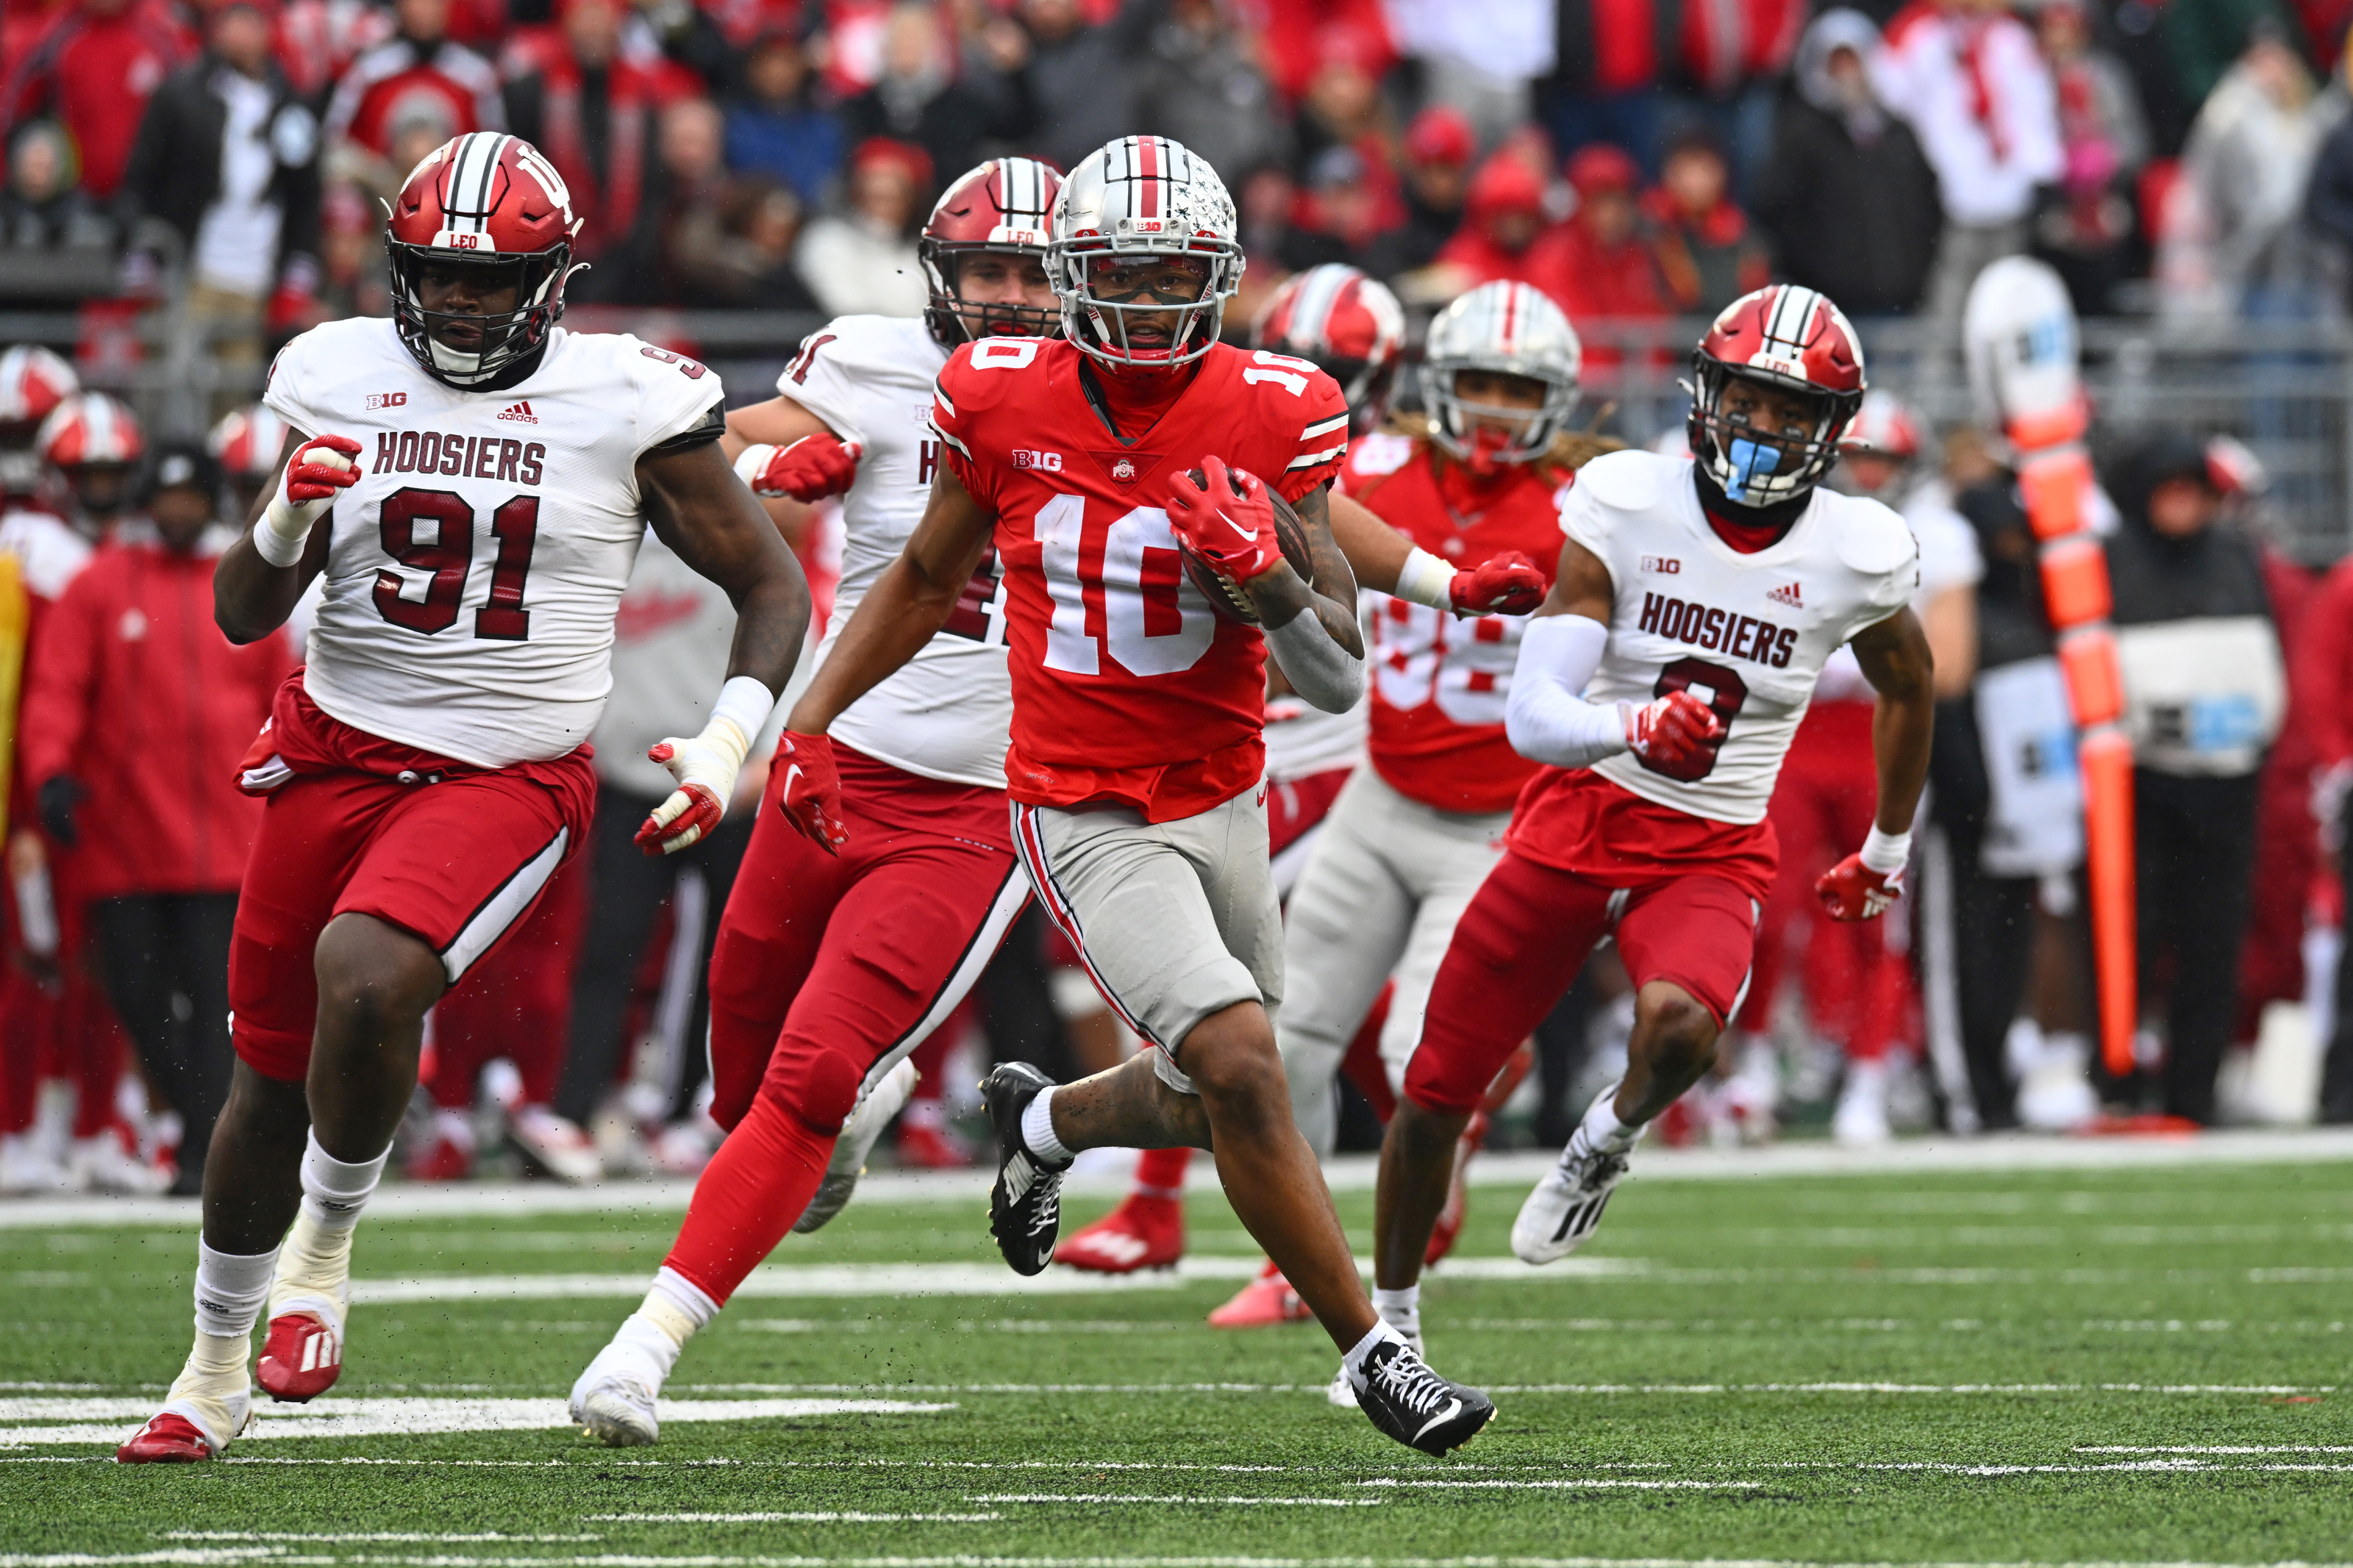 Ohio State Football vs. Maryland Best Bets for Week 12